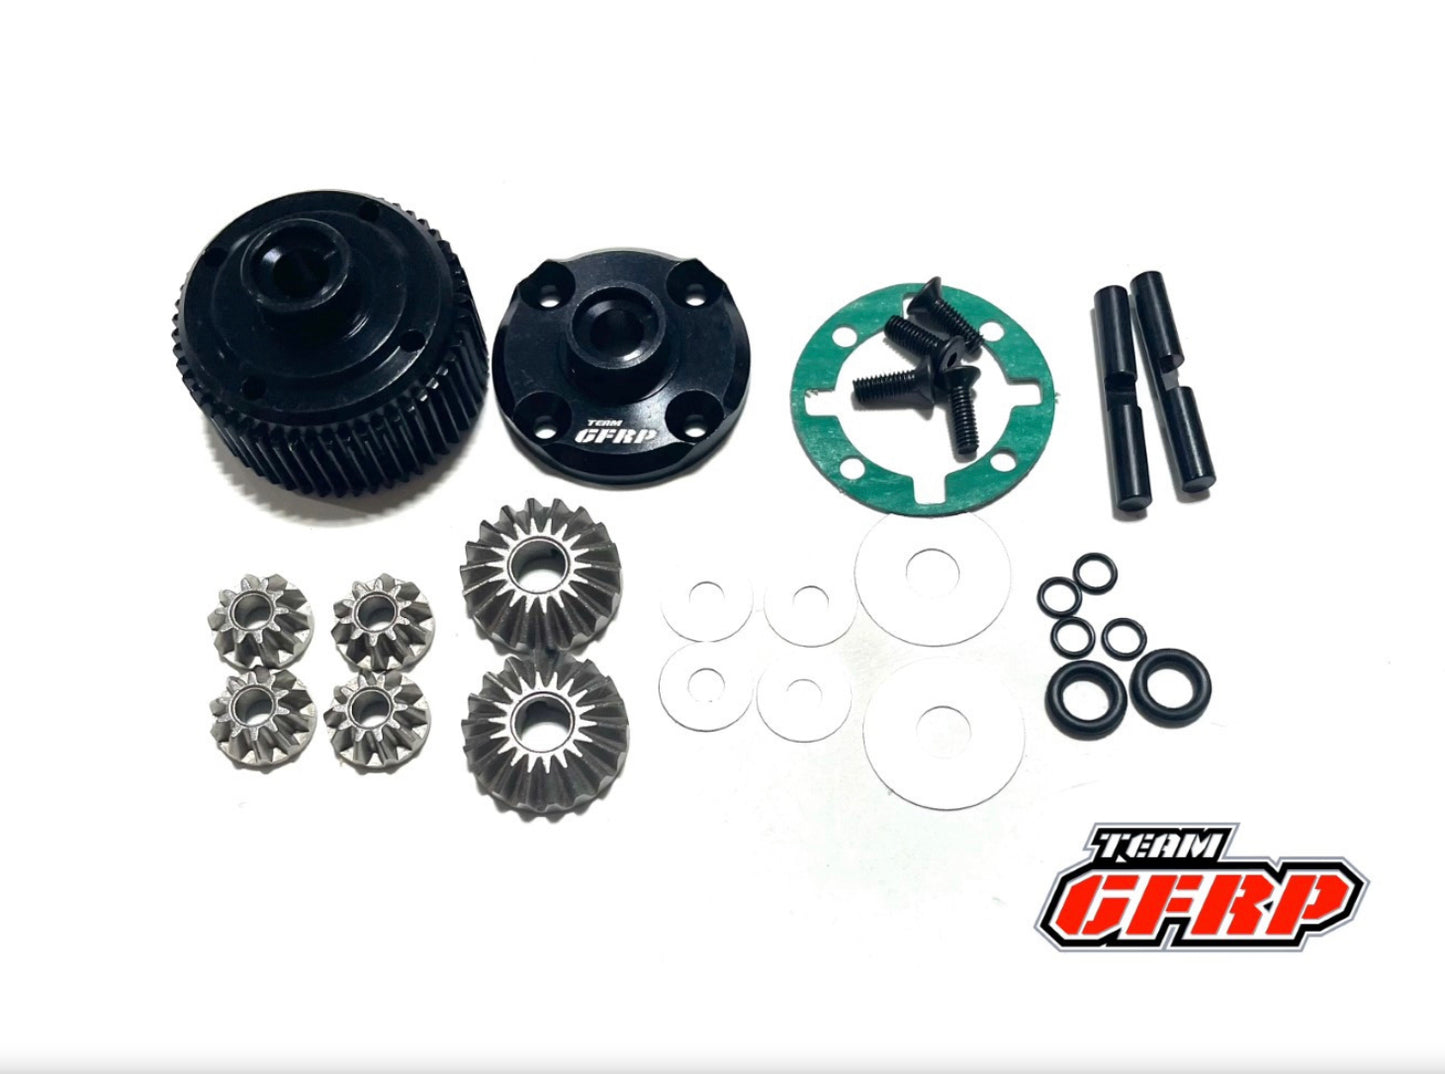 GFRP Aluminum Gear Diff Assembly (Trans)